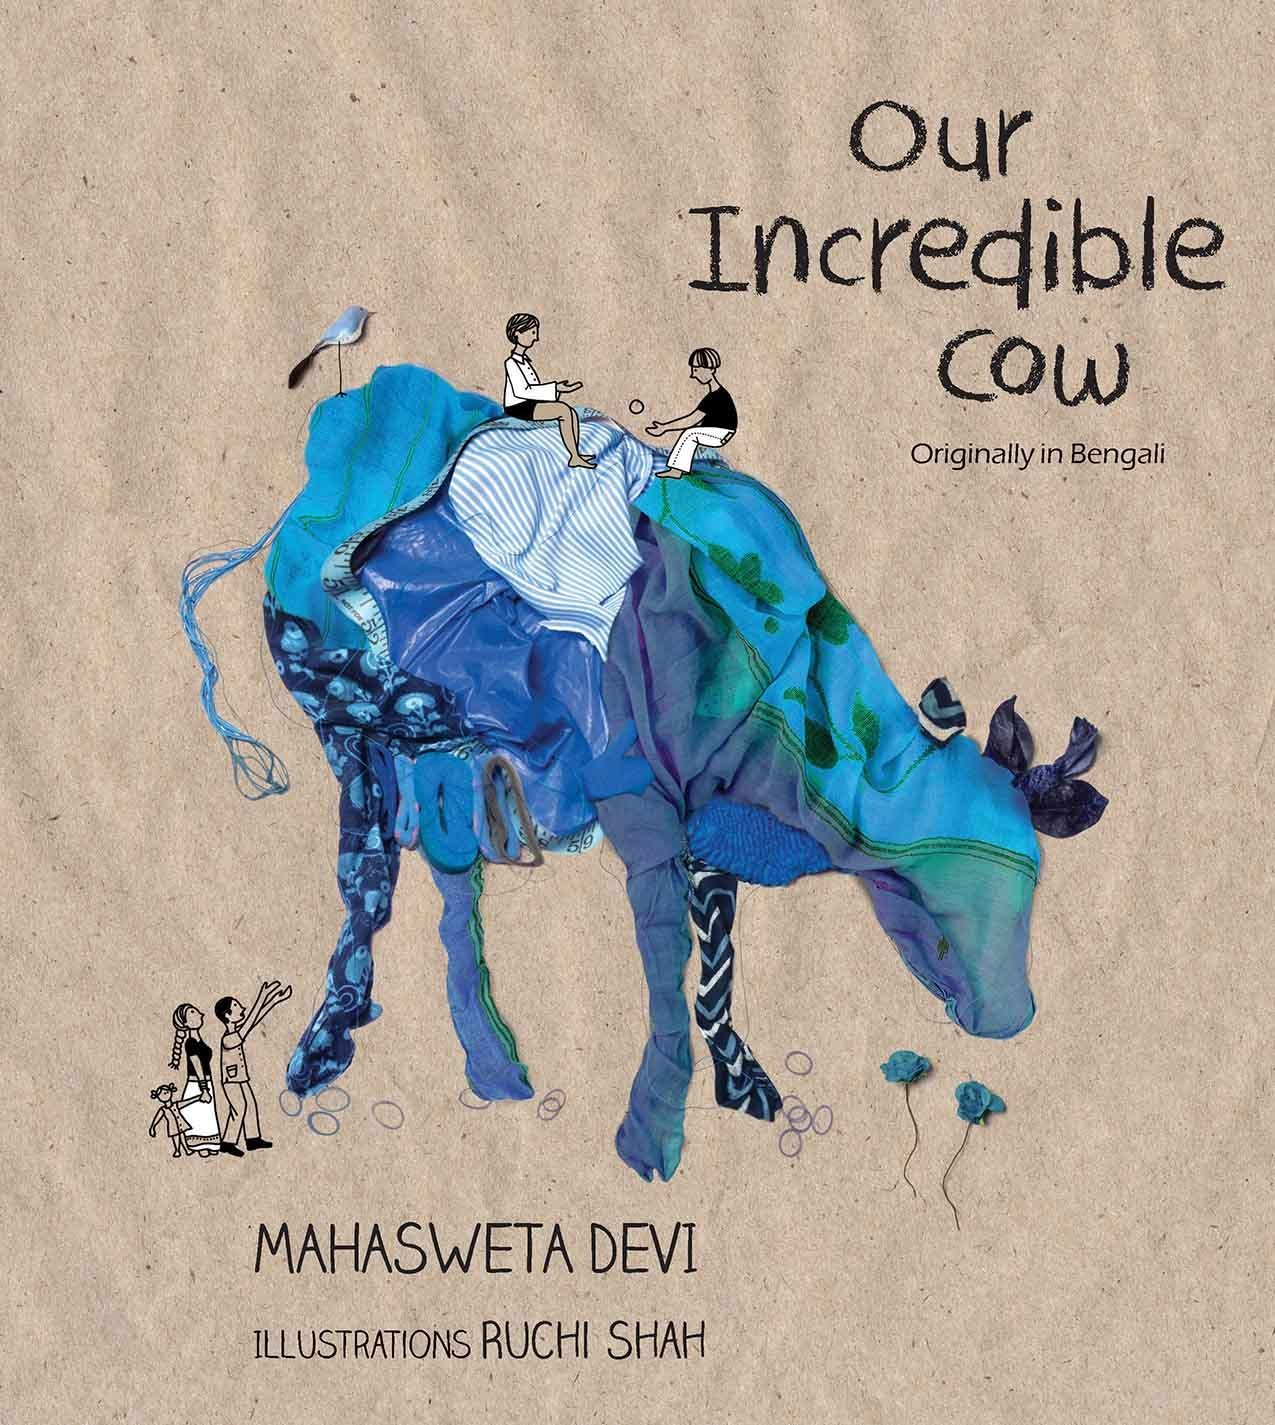 IMG : Our Incredible Cow